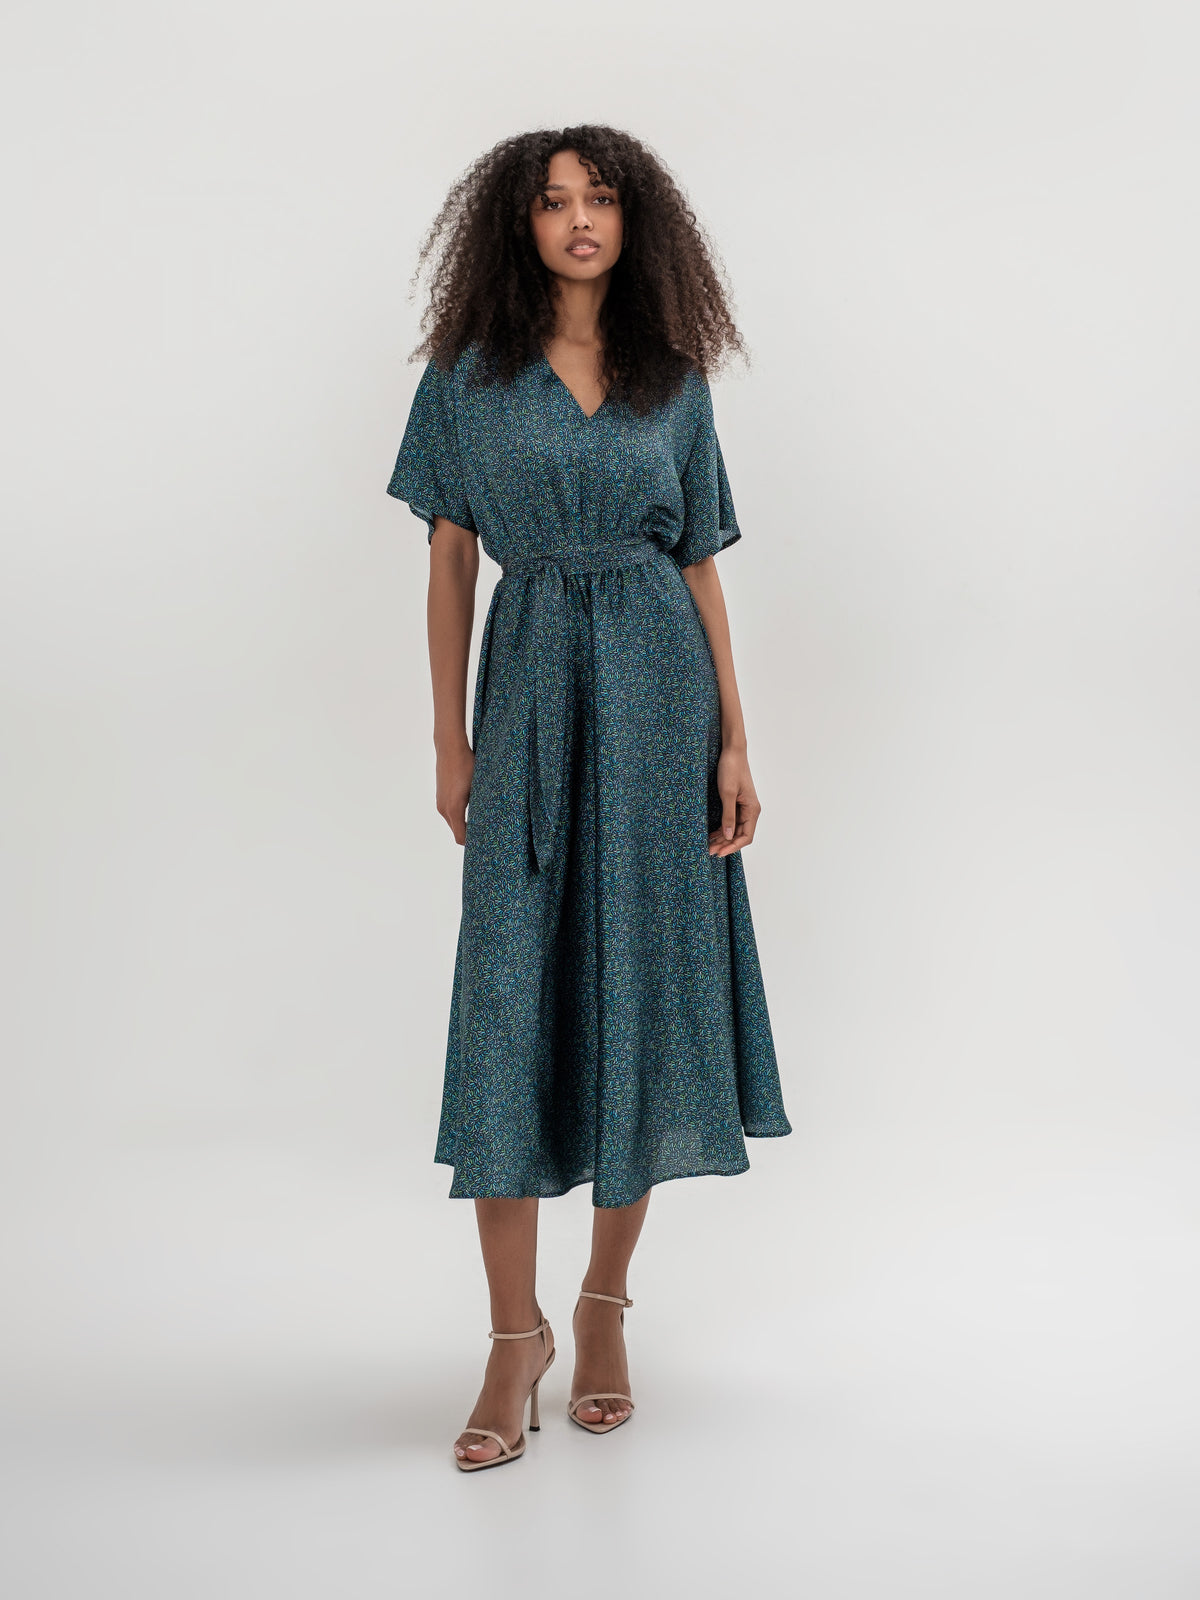 Emerald green dress with kimano sleeves V-neck with tie belt